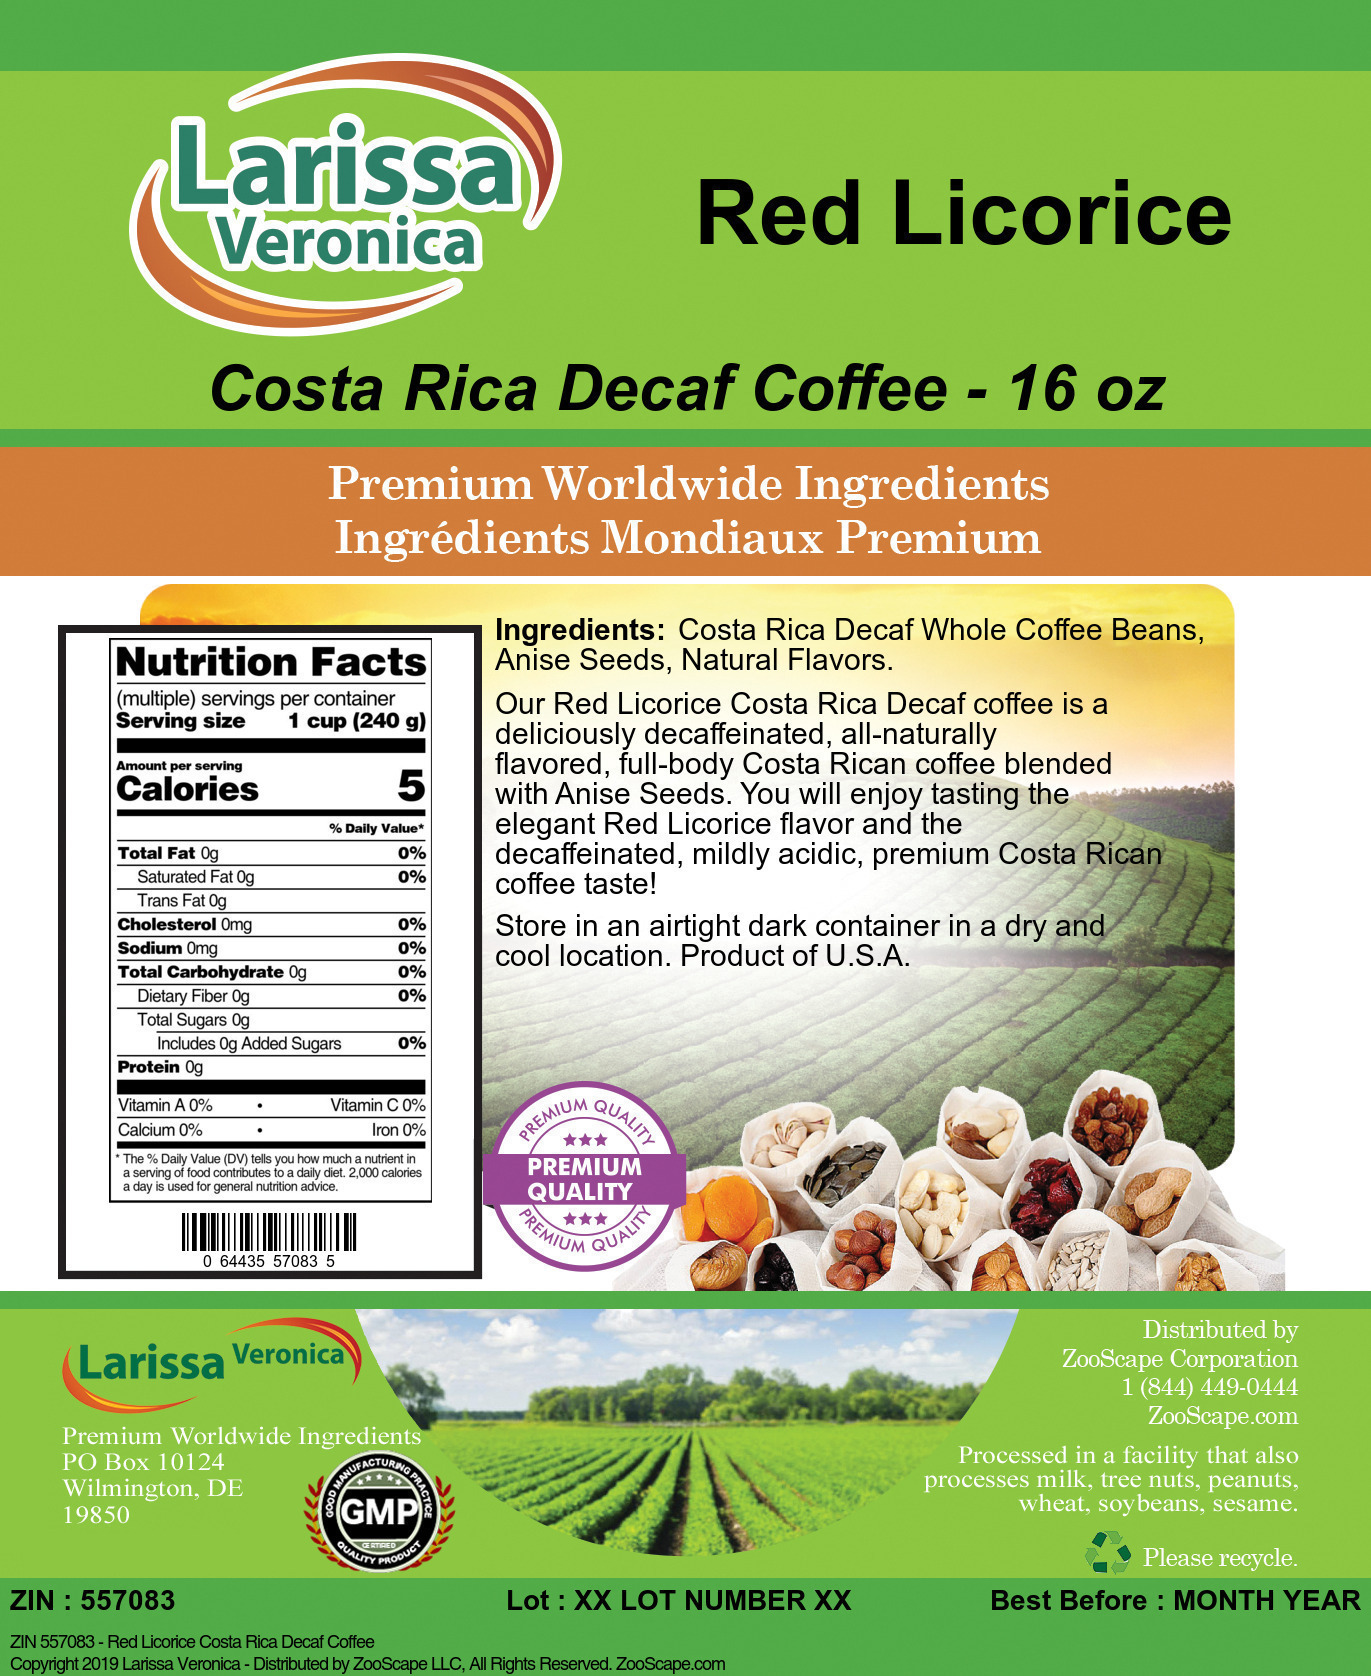 Red Licorice Costa Rica Decaf Coffee - Label